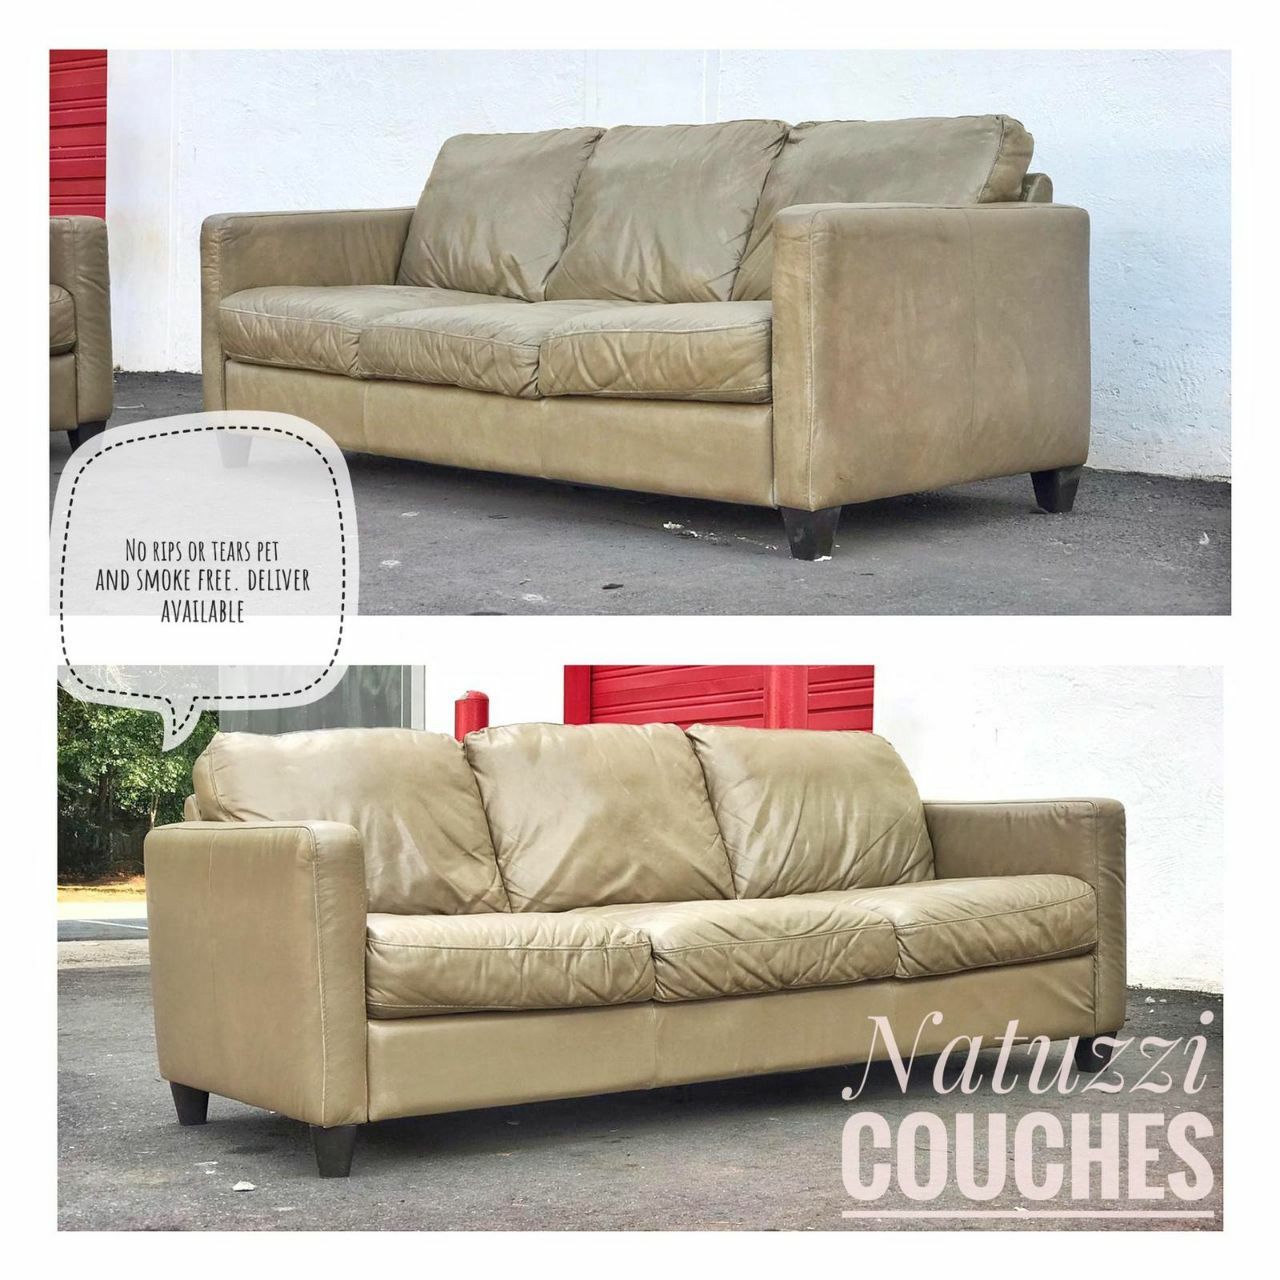 Italian leather couches from NATUZZI pet and smoke free good conditions.